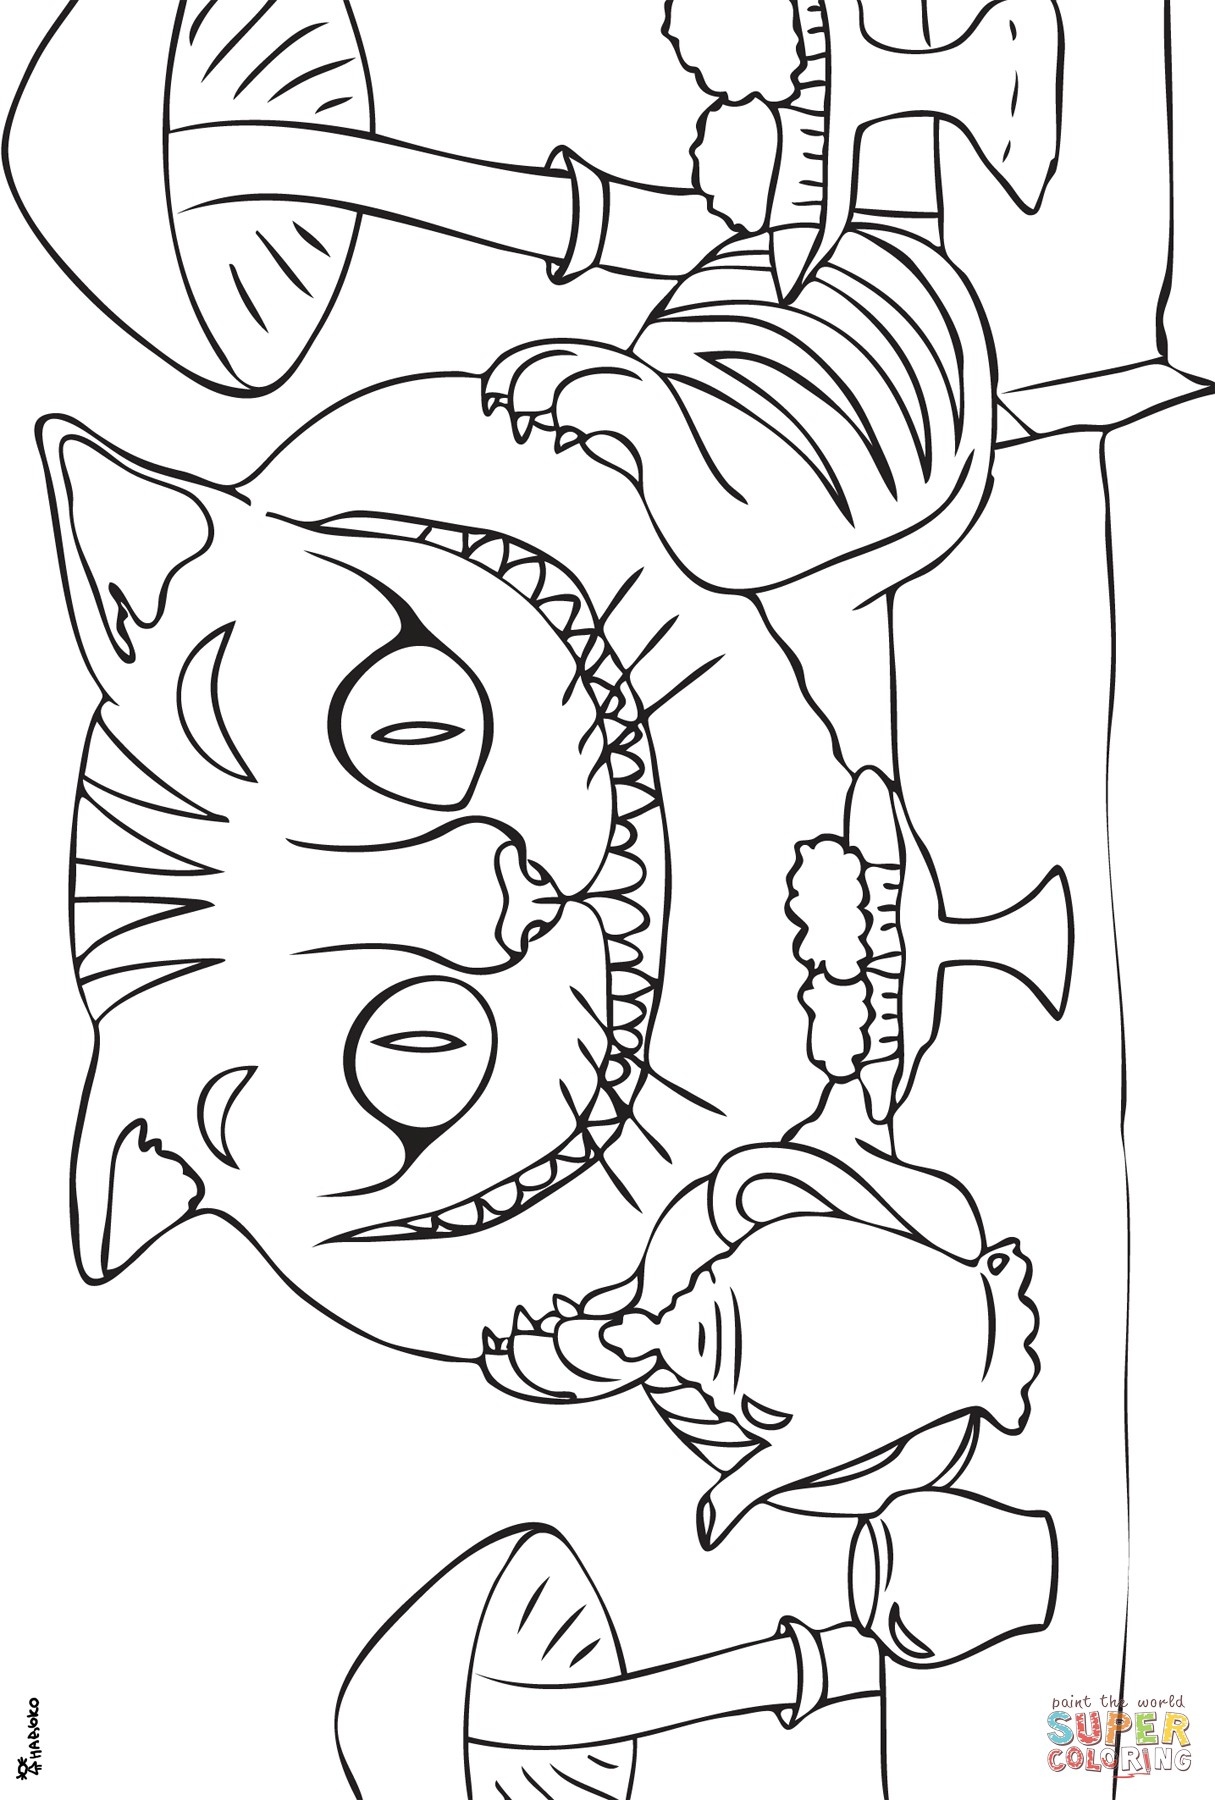 Cheshire Cat Coloring Page Wallpaper